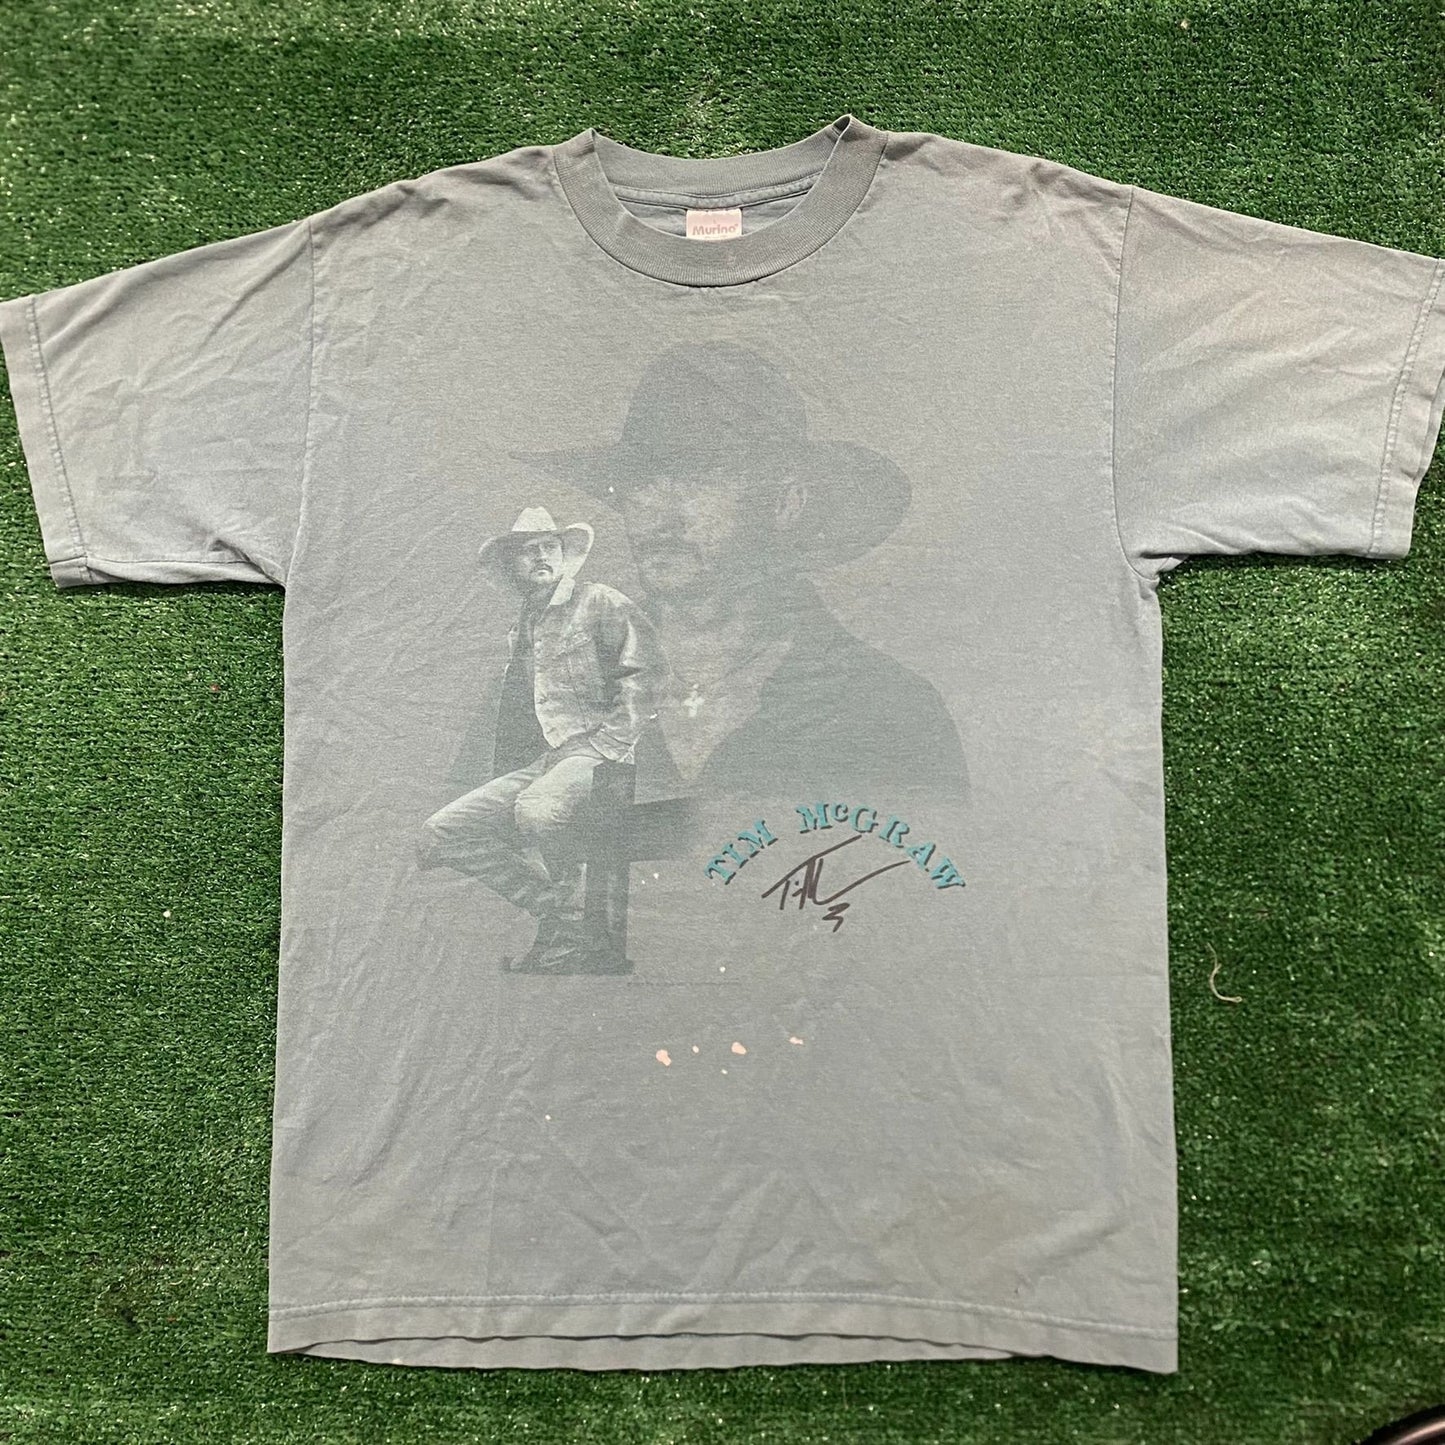 Vintage 90s Tim McGraw Country Western Music Band Tee